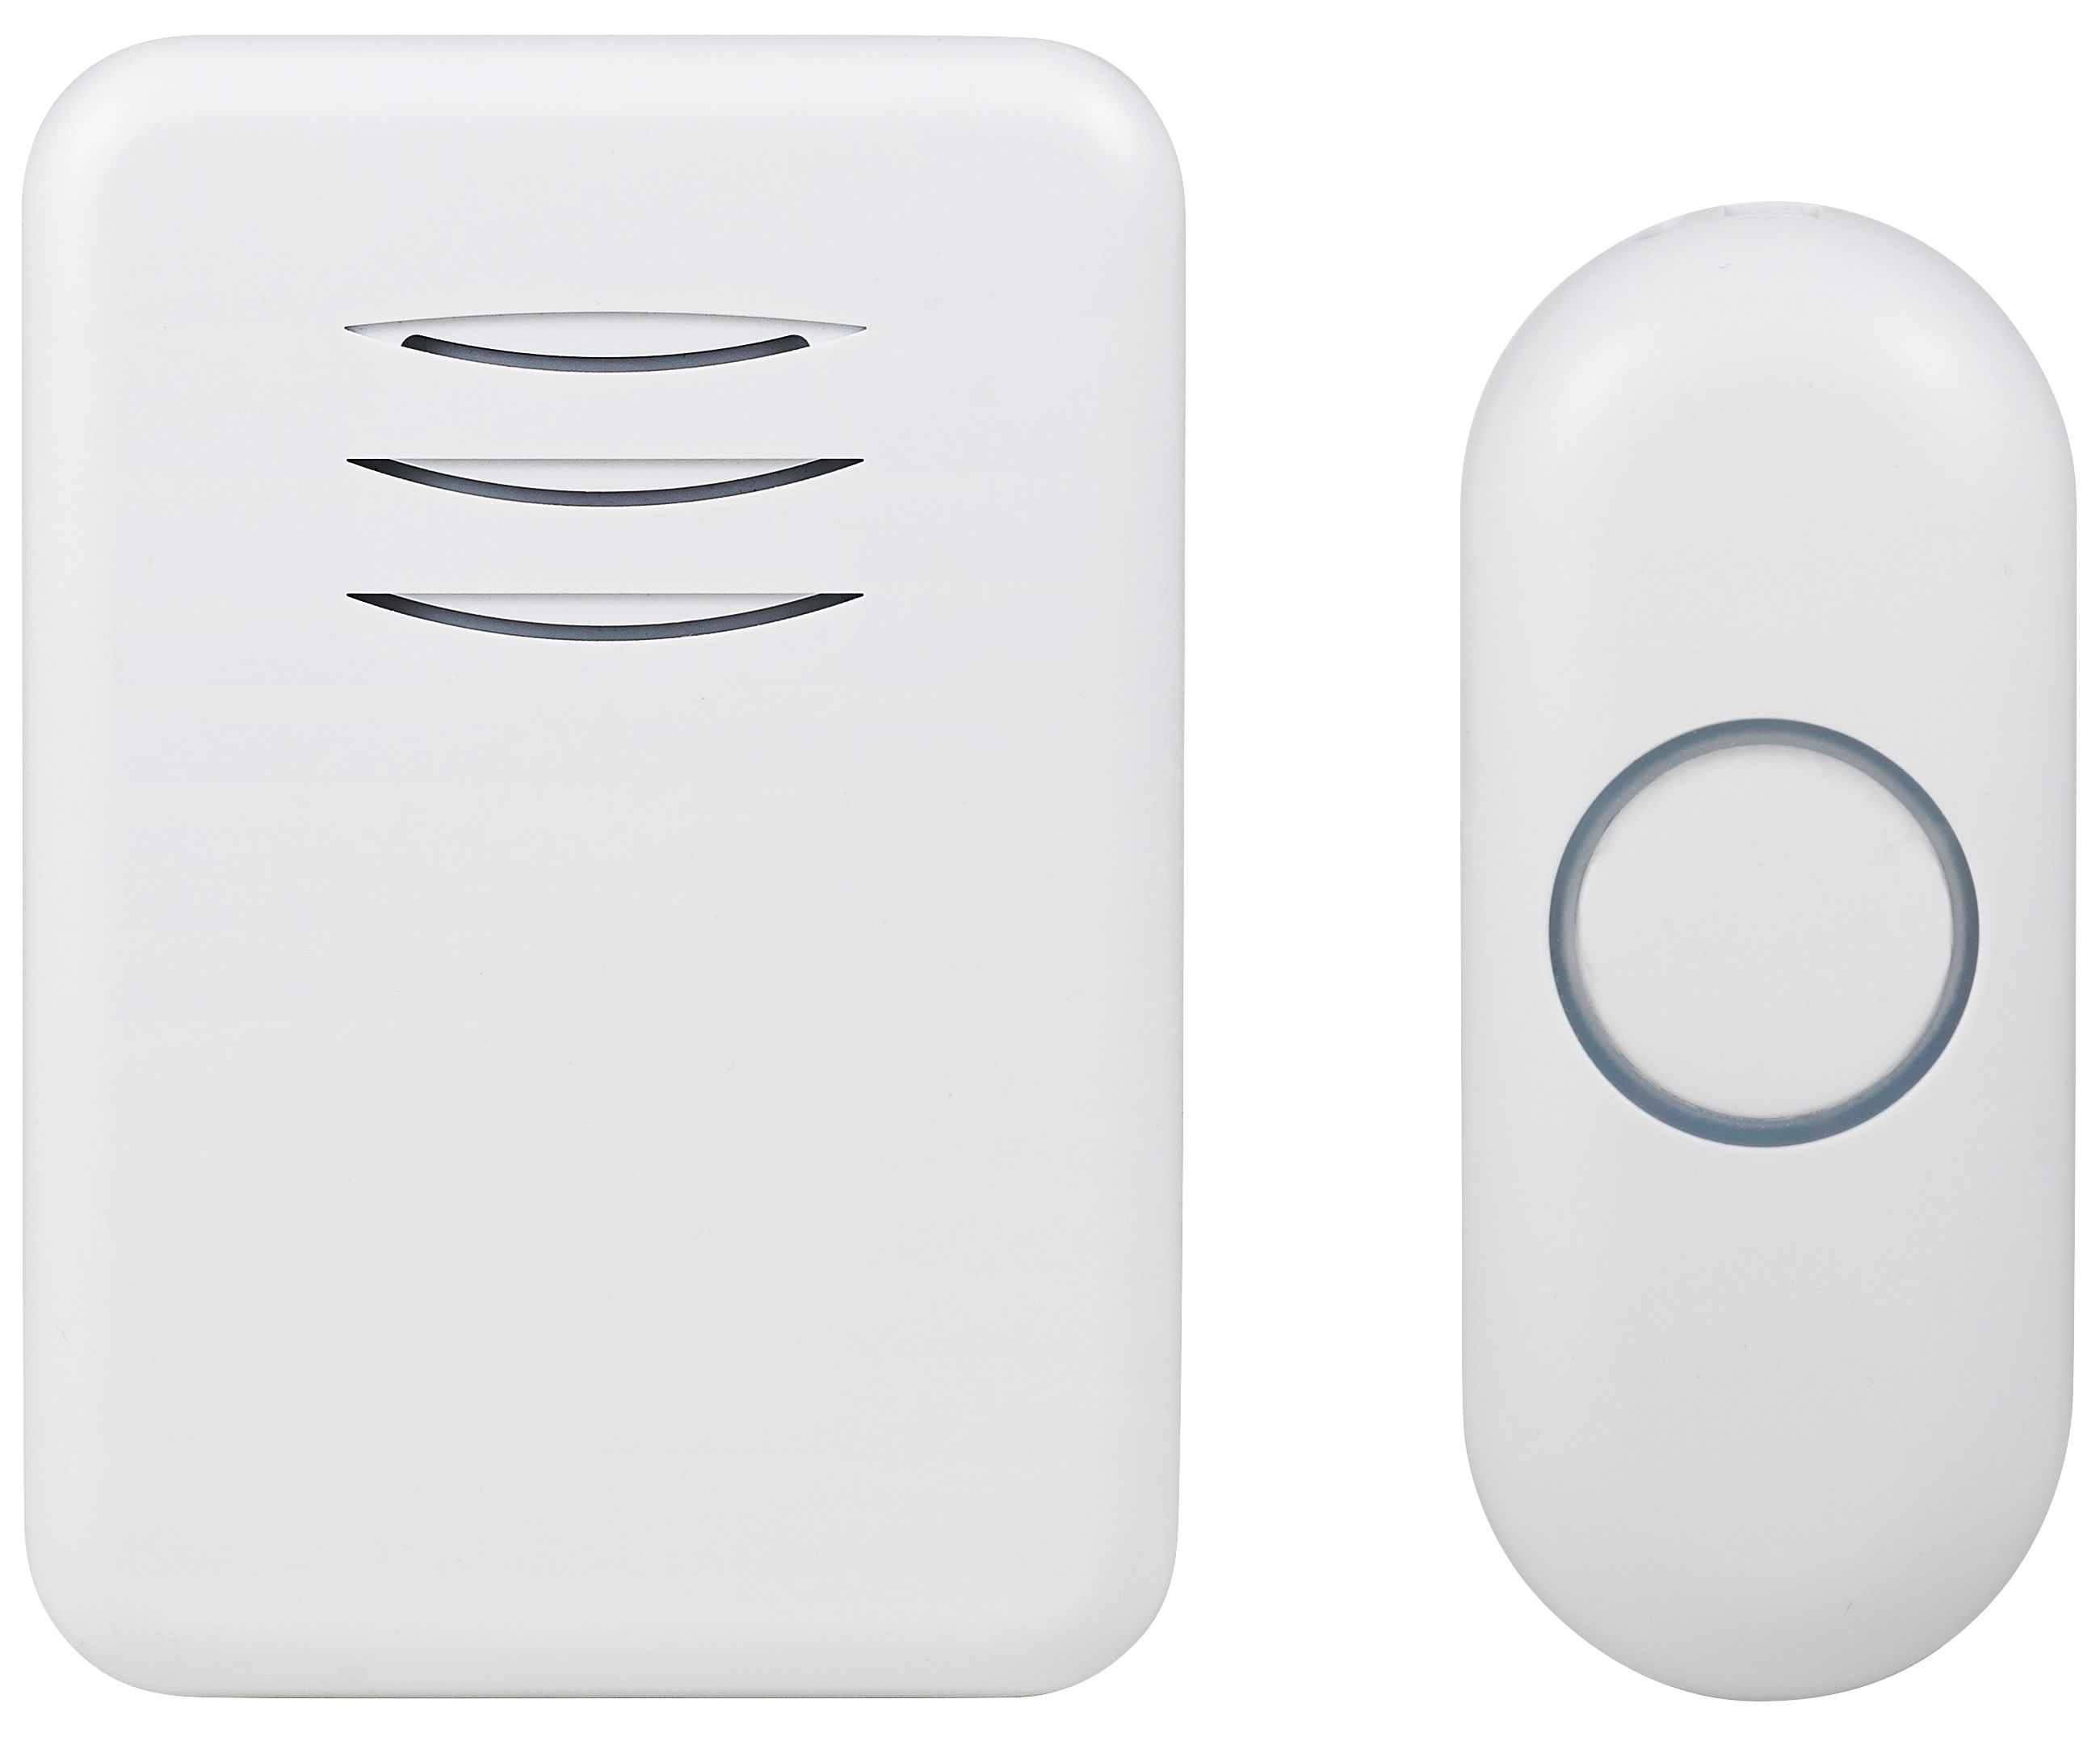 Byron DBY-22312UK Wireless Doorbell with Plug-In Chime - 150m